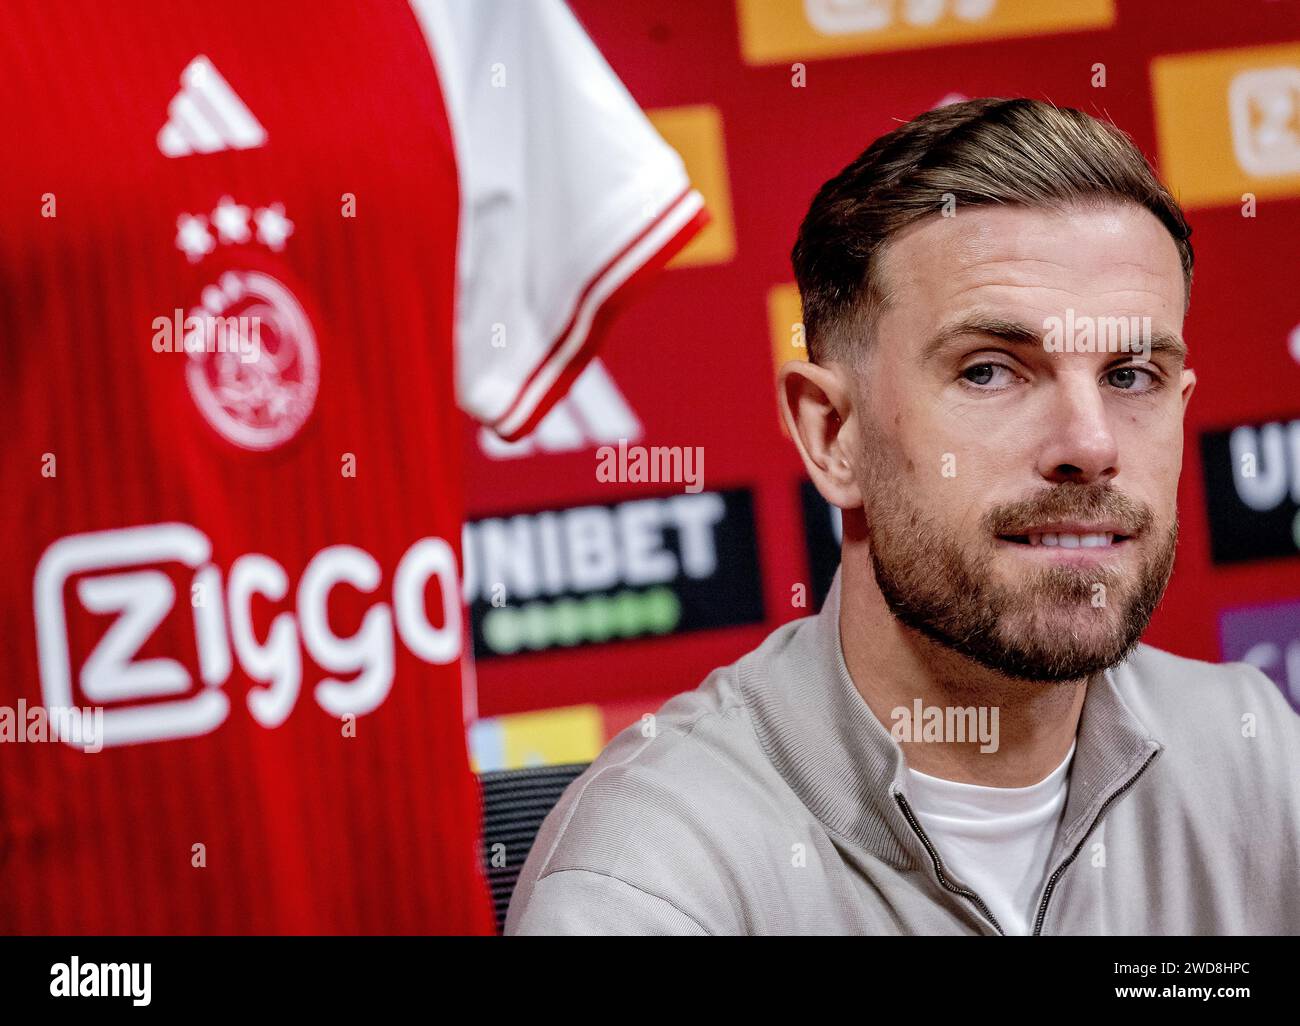 AMSTERDAM - Jordan Henderson is presented by Ajax during a press moment in the ArenA. The former Liverpool captain has signed a 2.5-year contract after a medical examination. ANP REMKO DE WAAL Stock Photo